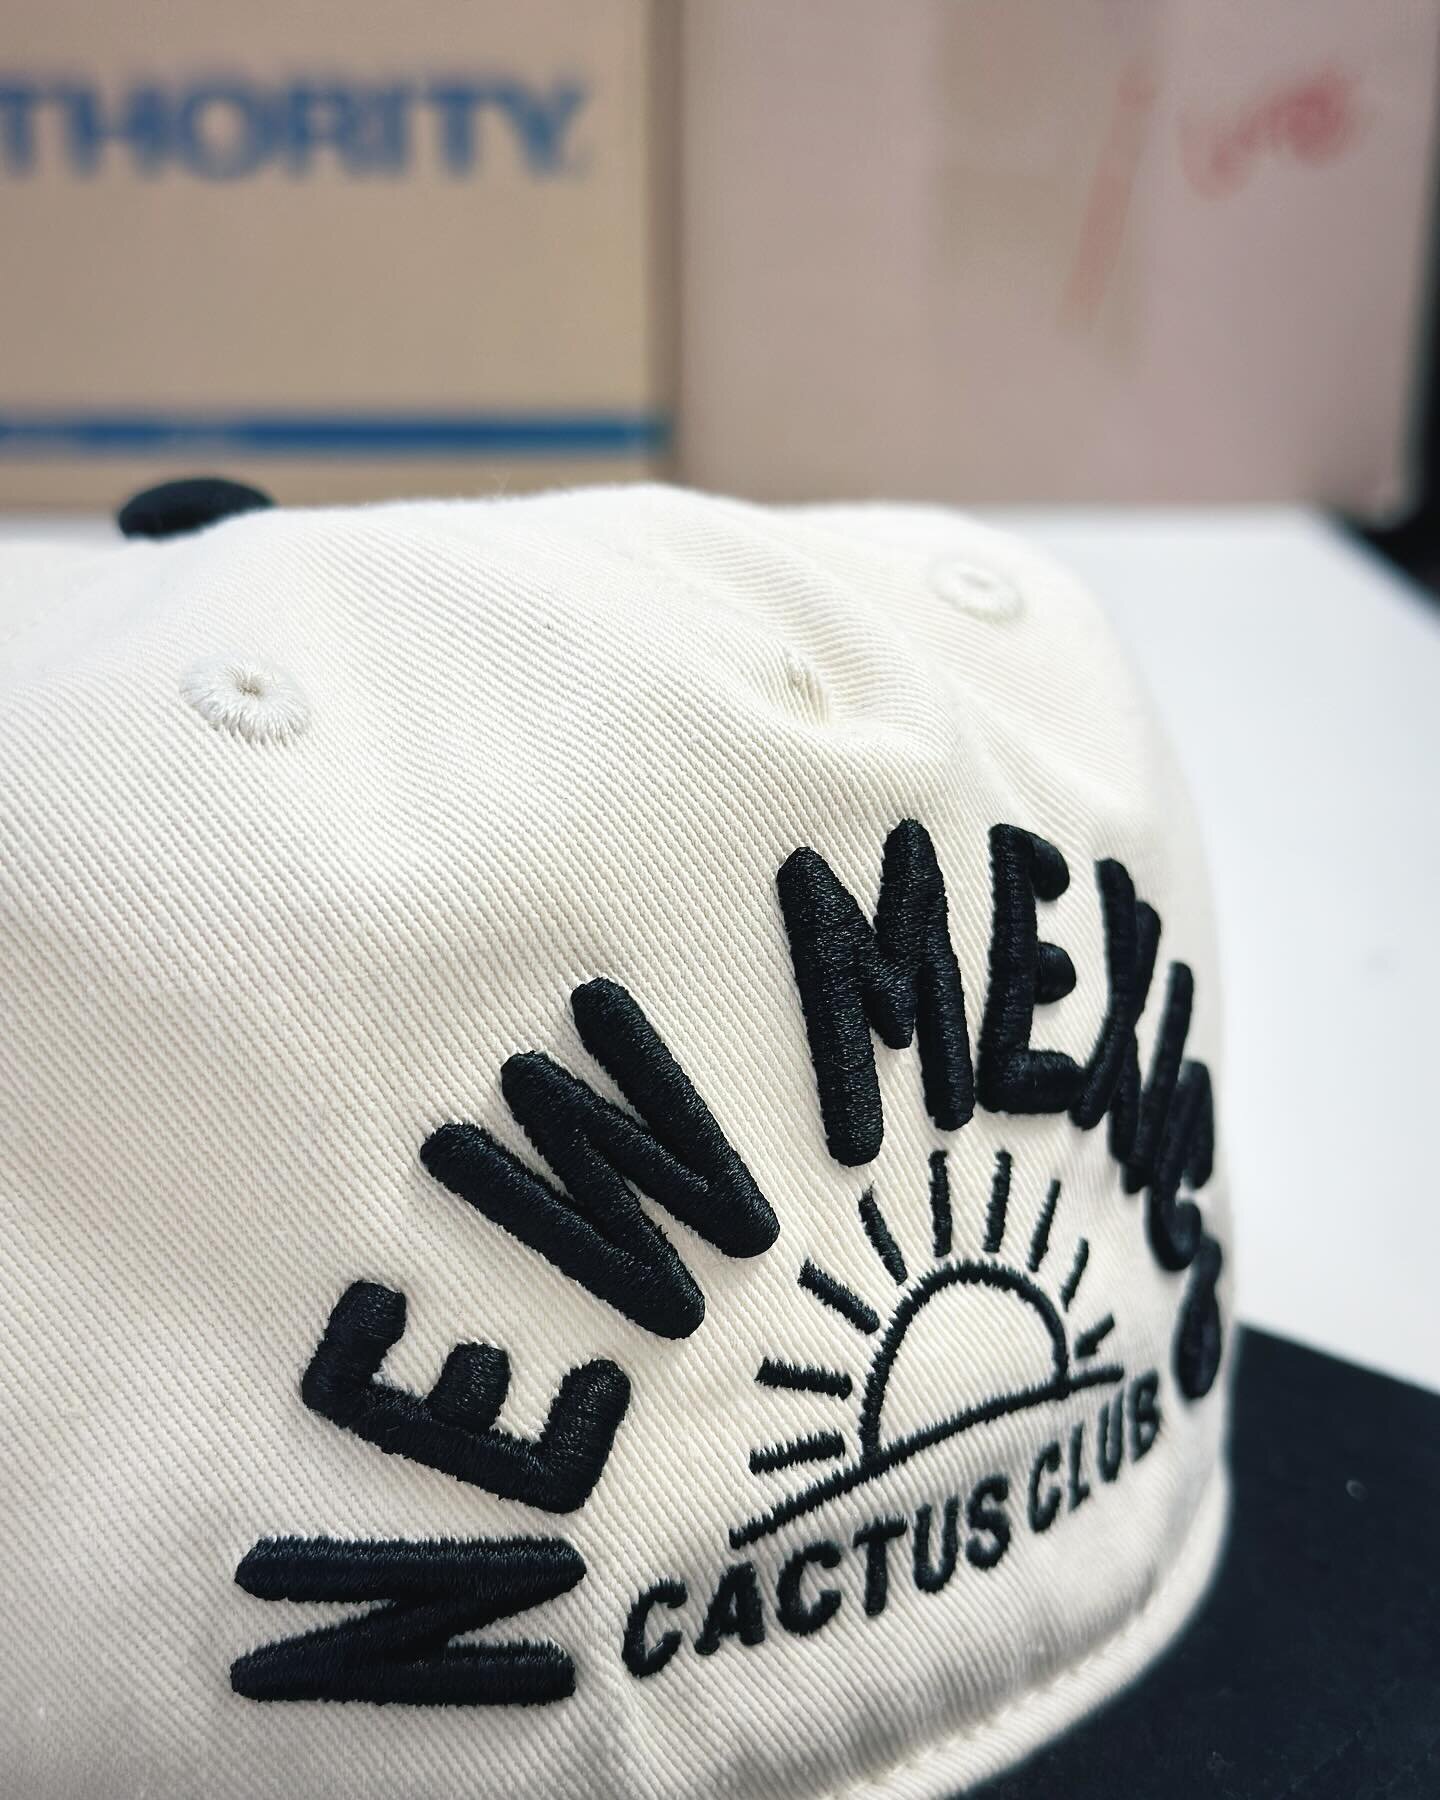 another new hat going on the website tomorrow morning!
the puff embroidery came out *chefs kiss* on this one🤌🏻❤️&zwj;🔥